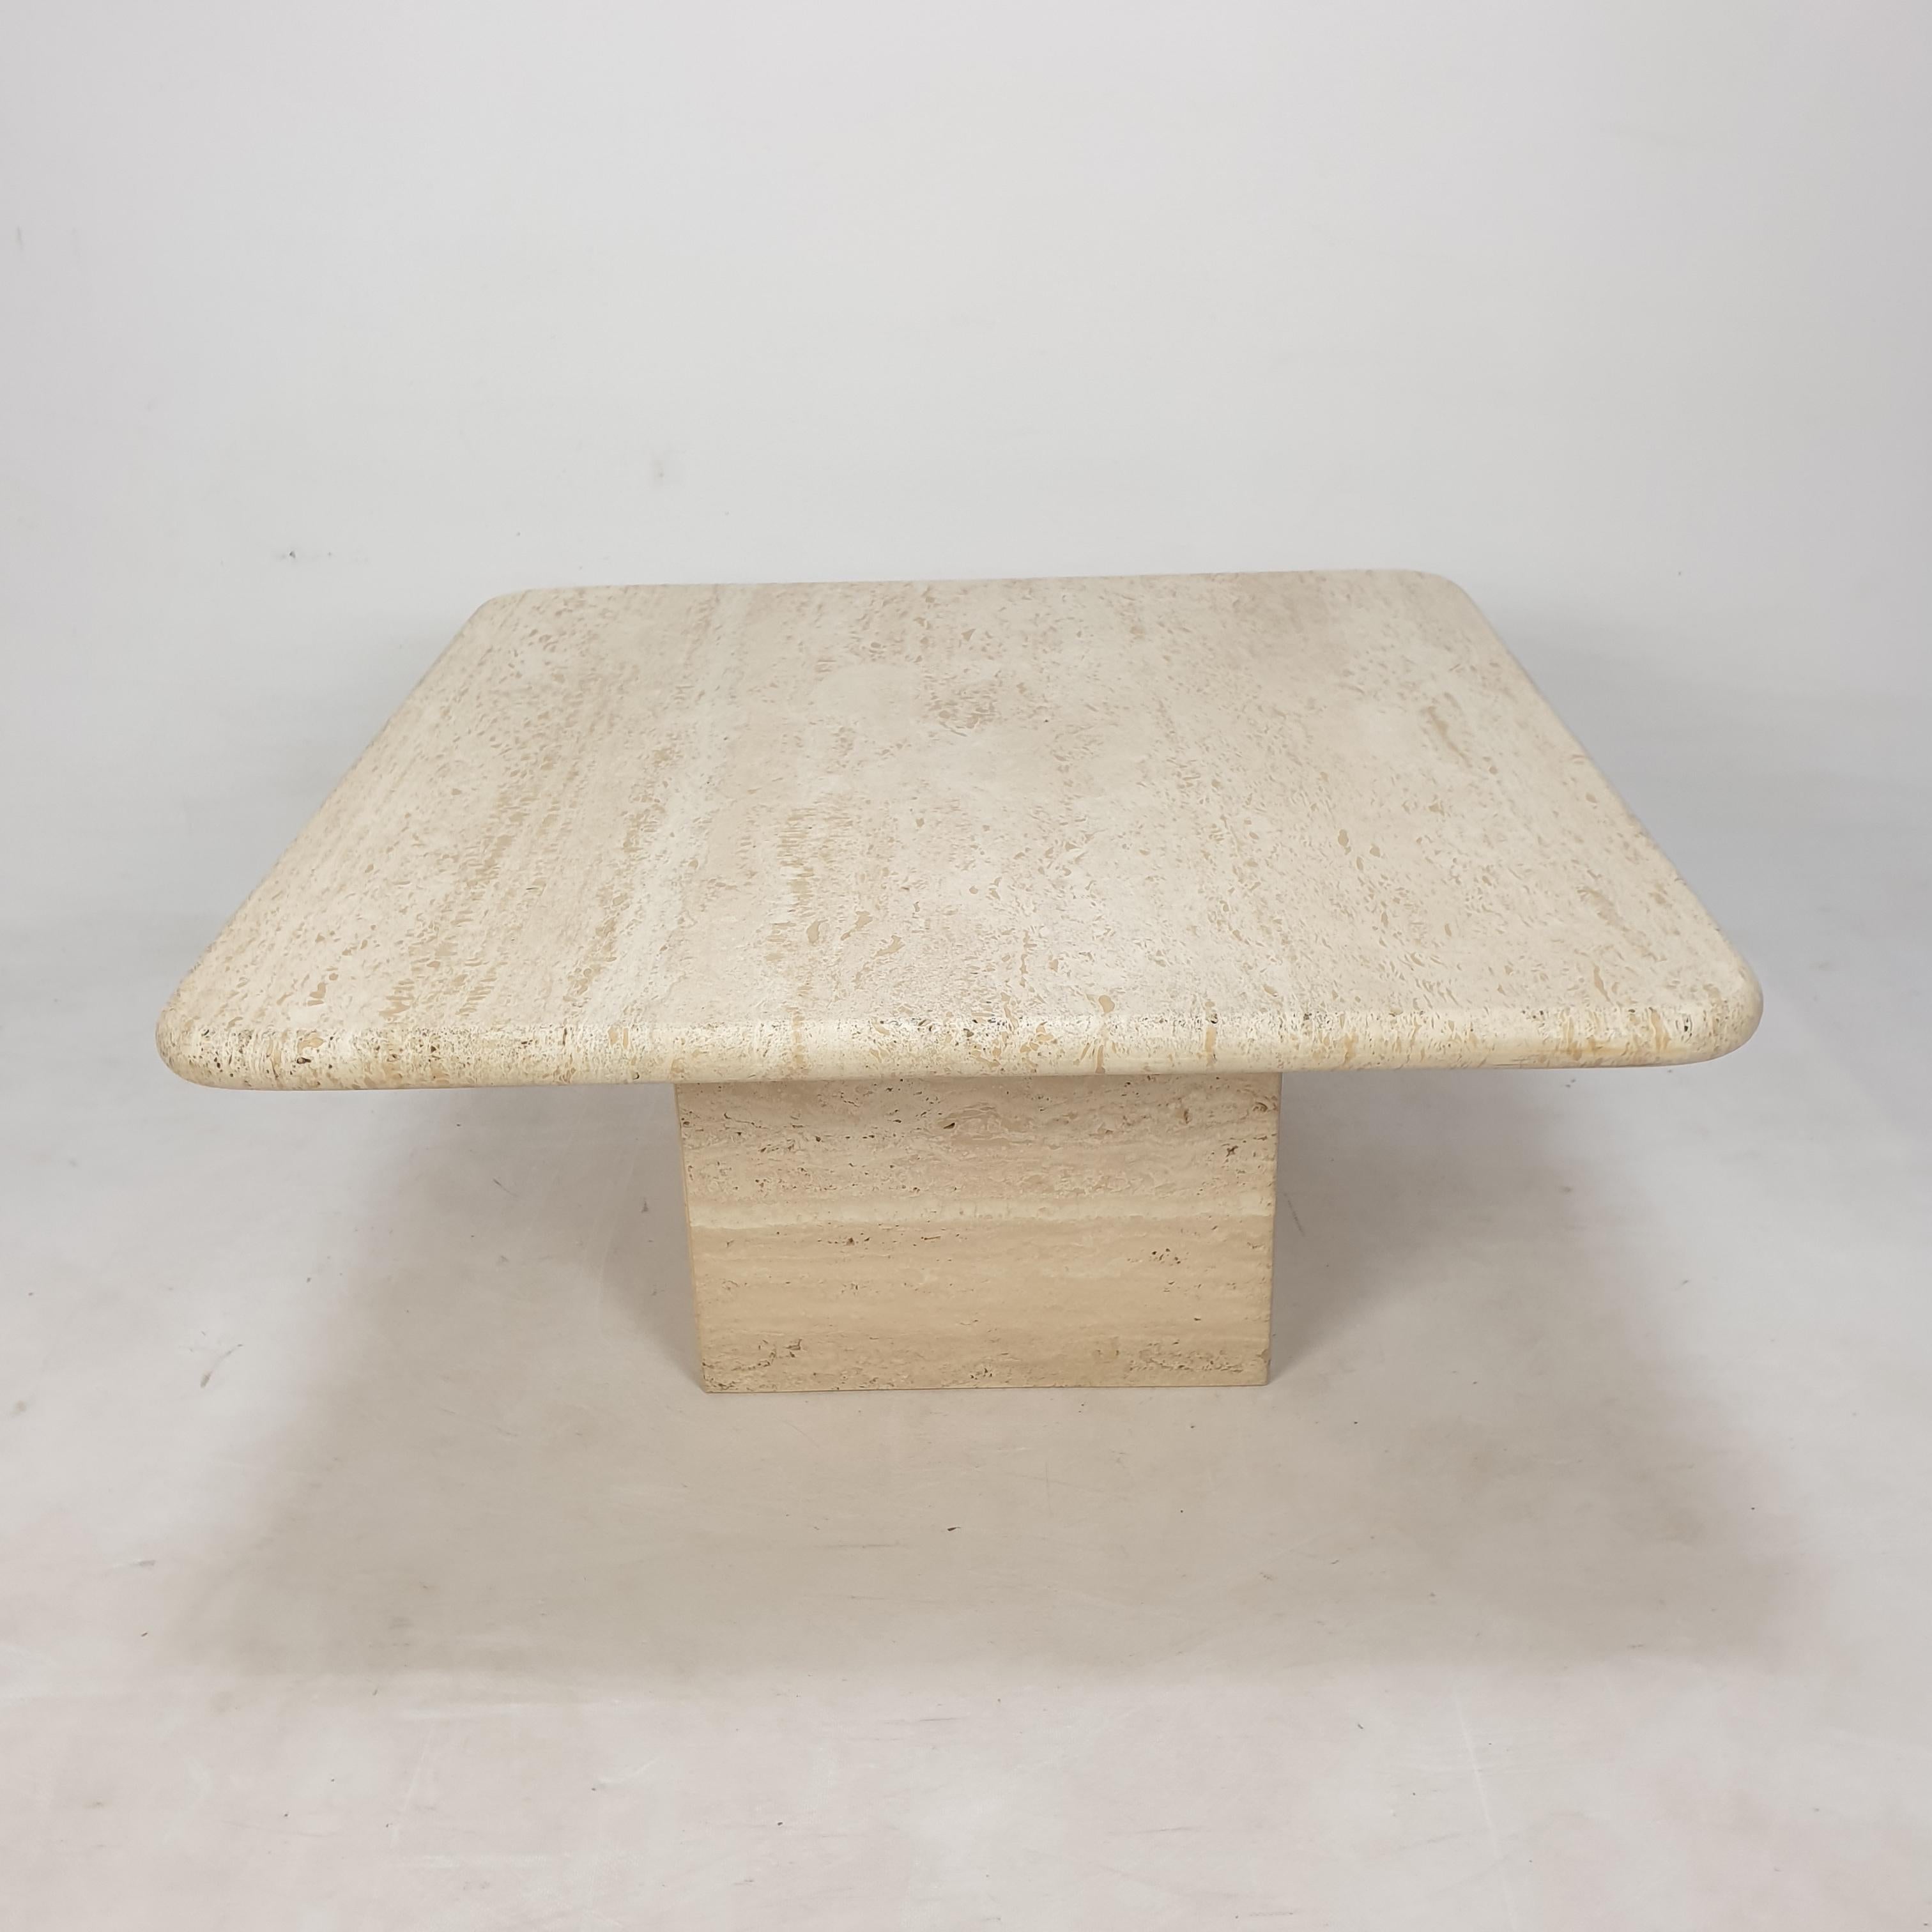 Very nice Italian coffee table from the 80's, handcrafted out of travertine. 

The plate and the base are made of beautiful travertine.